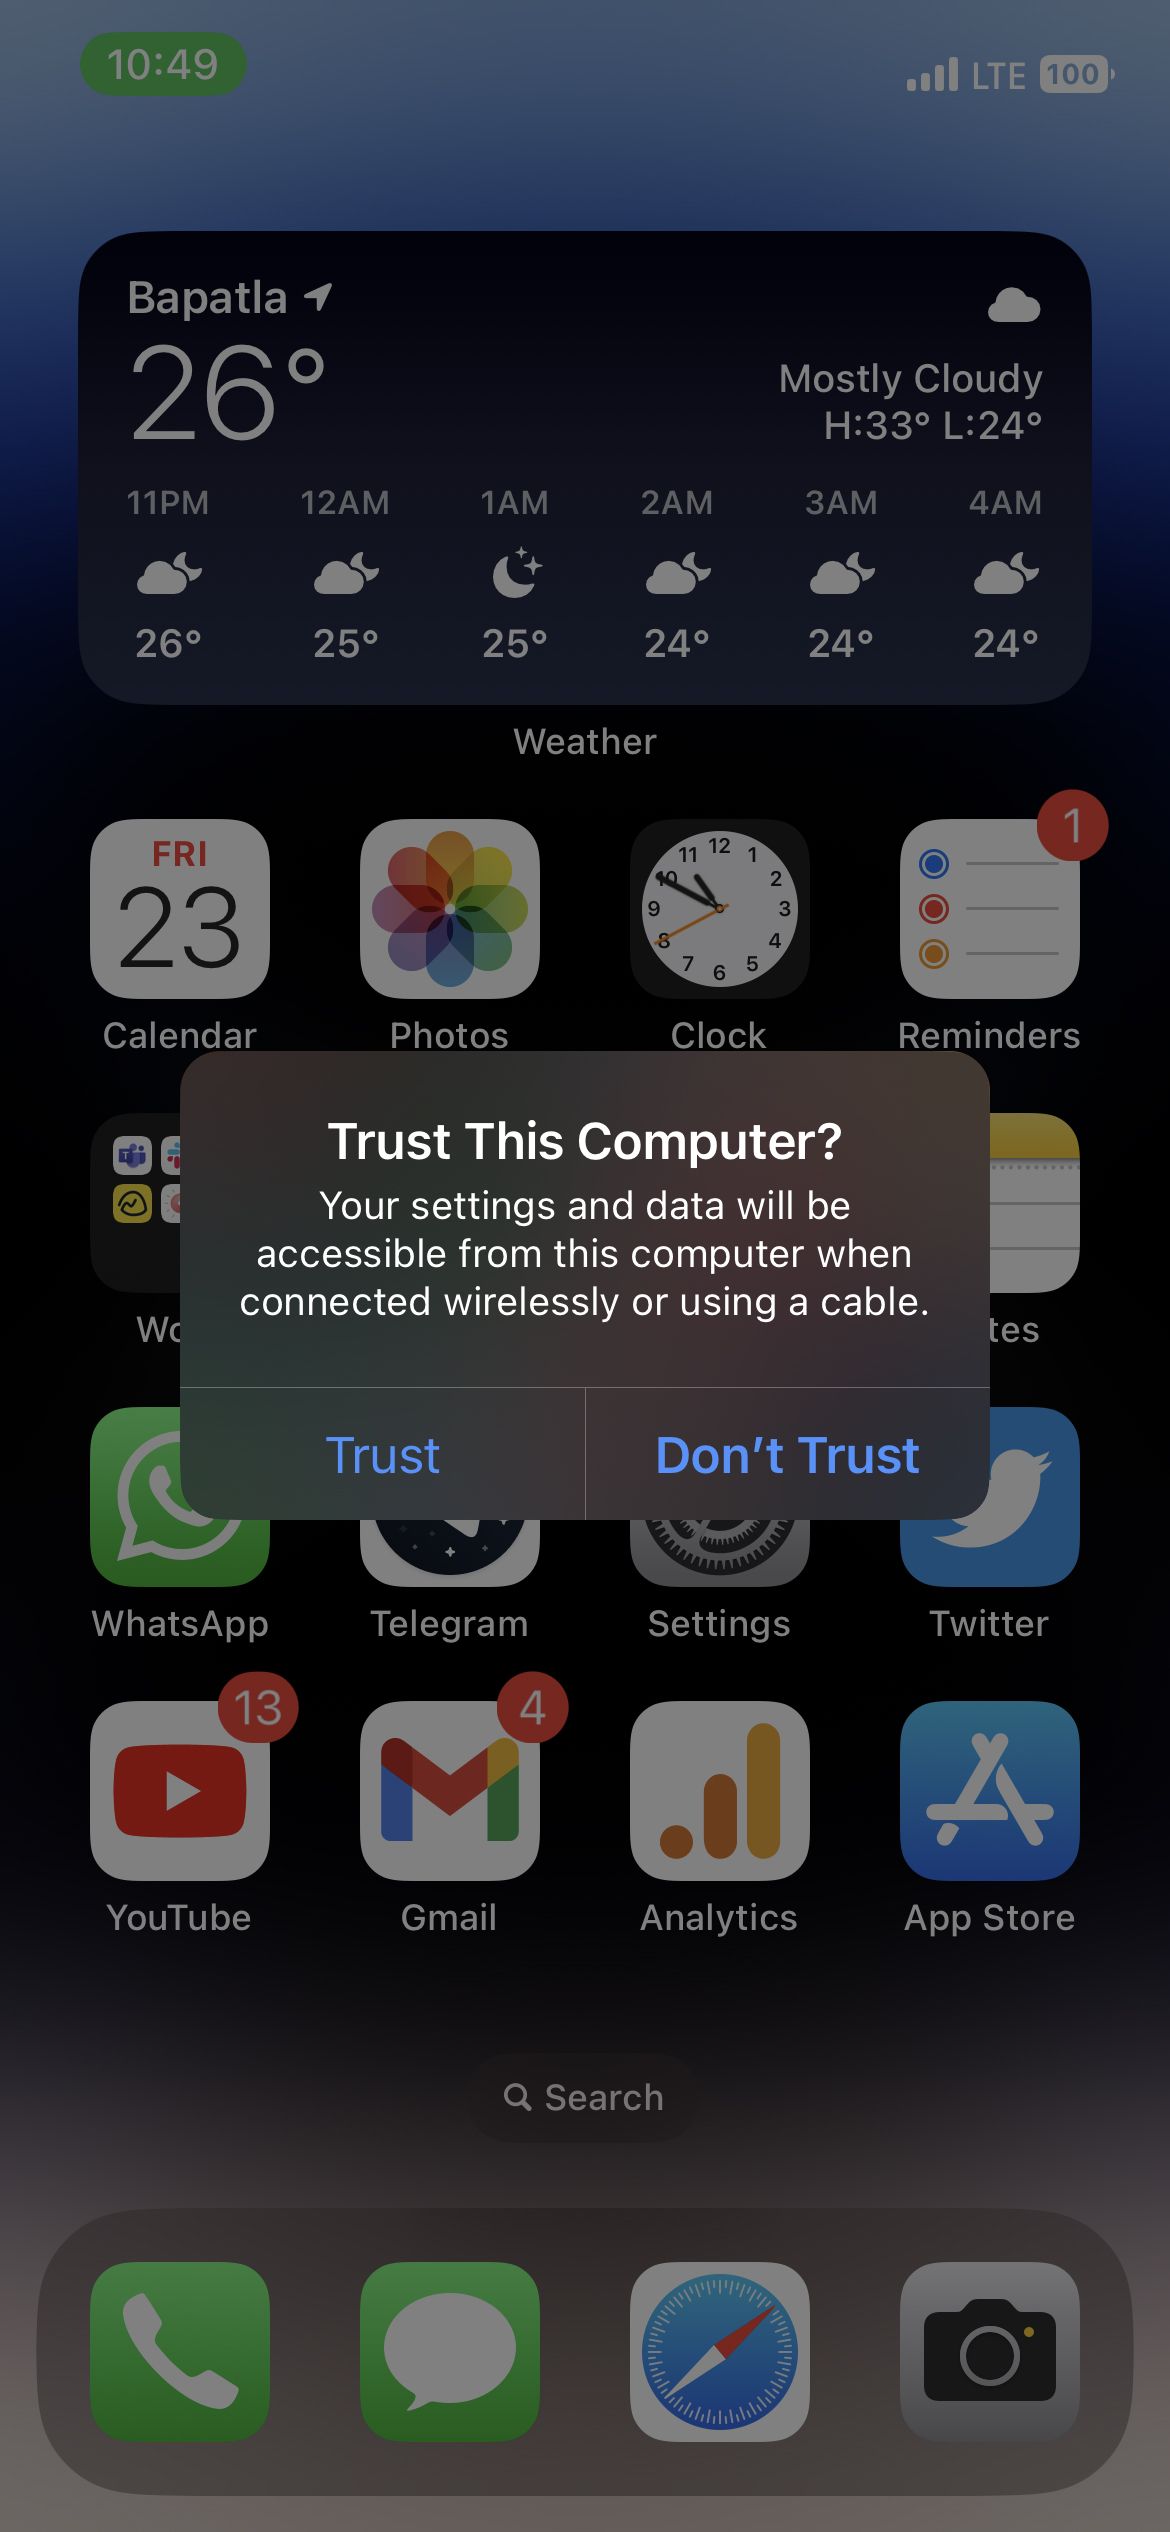 Trust this computer prompt on iOS